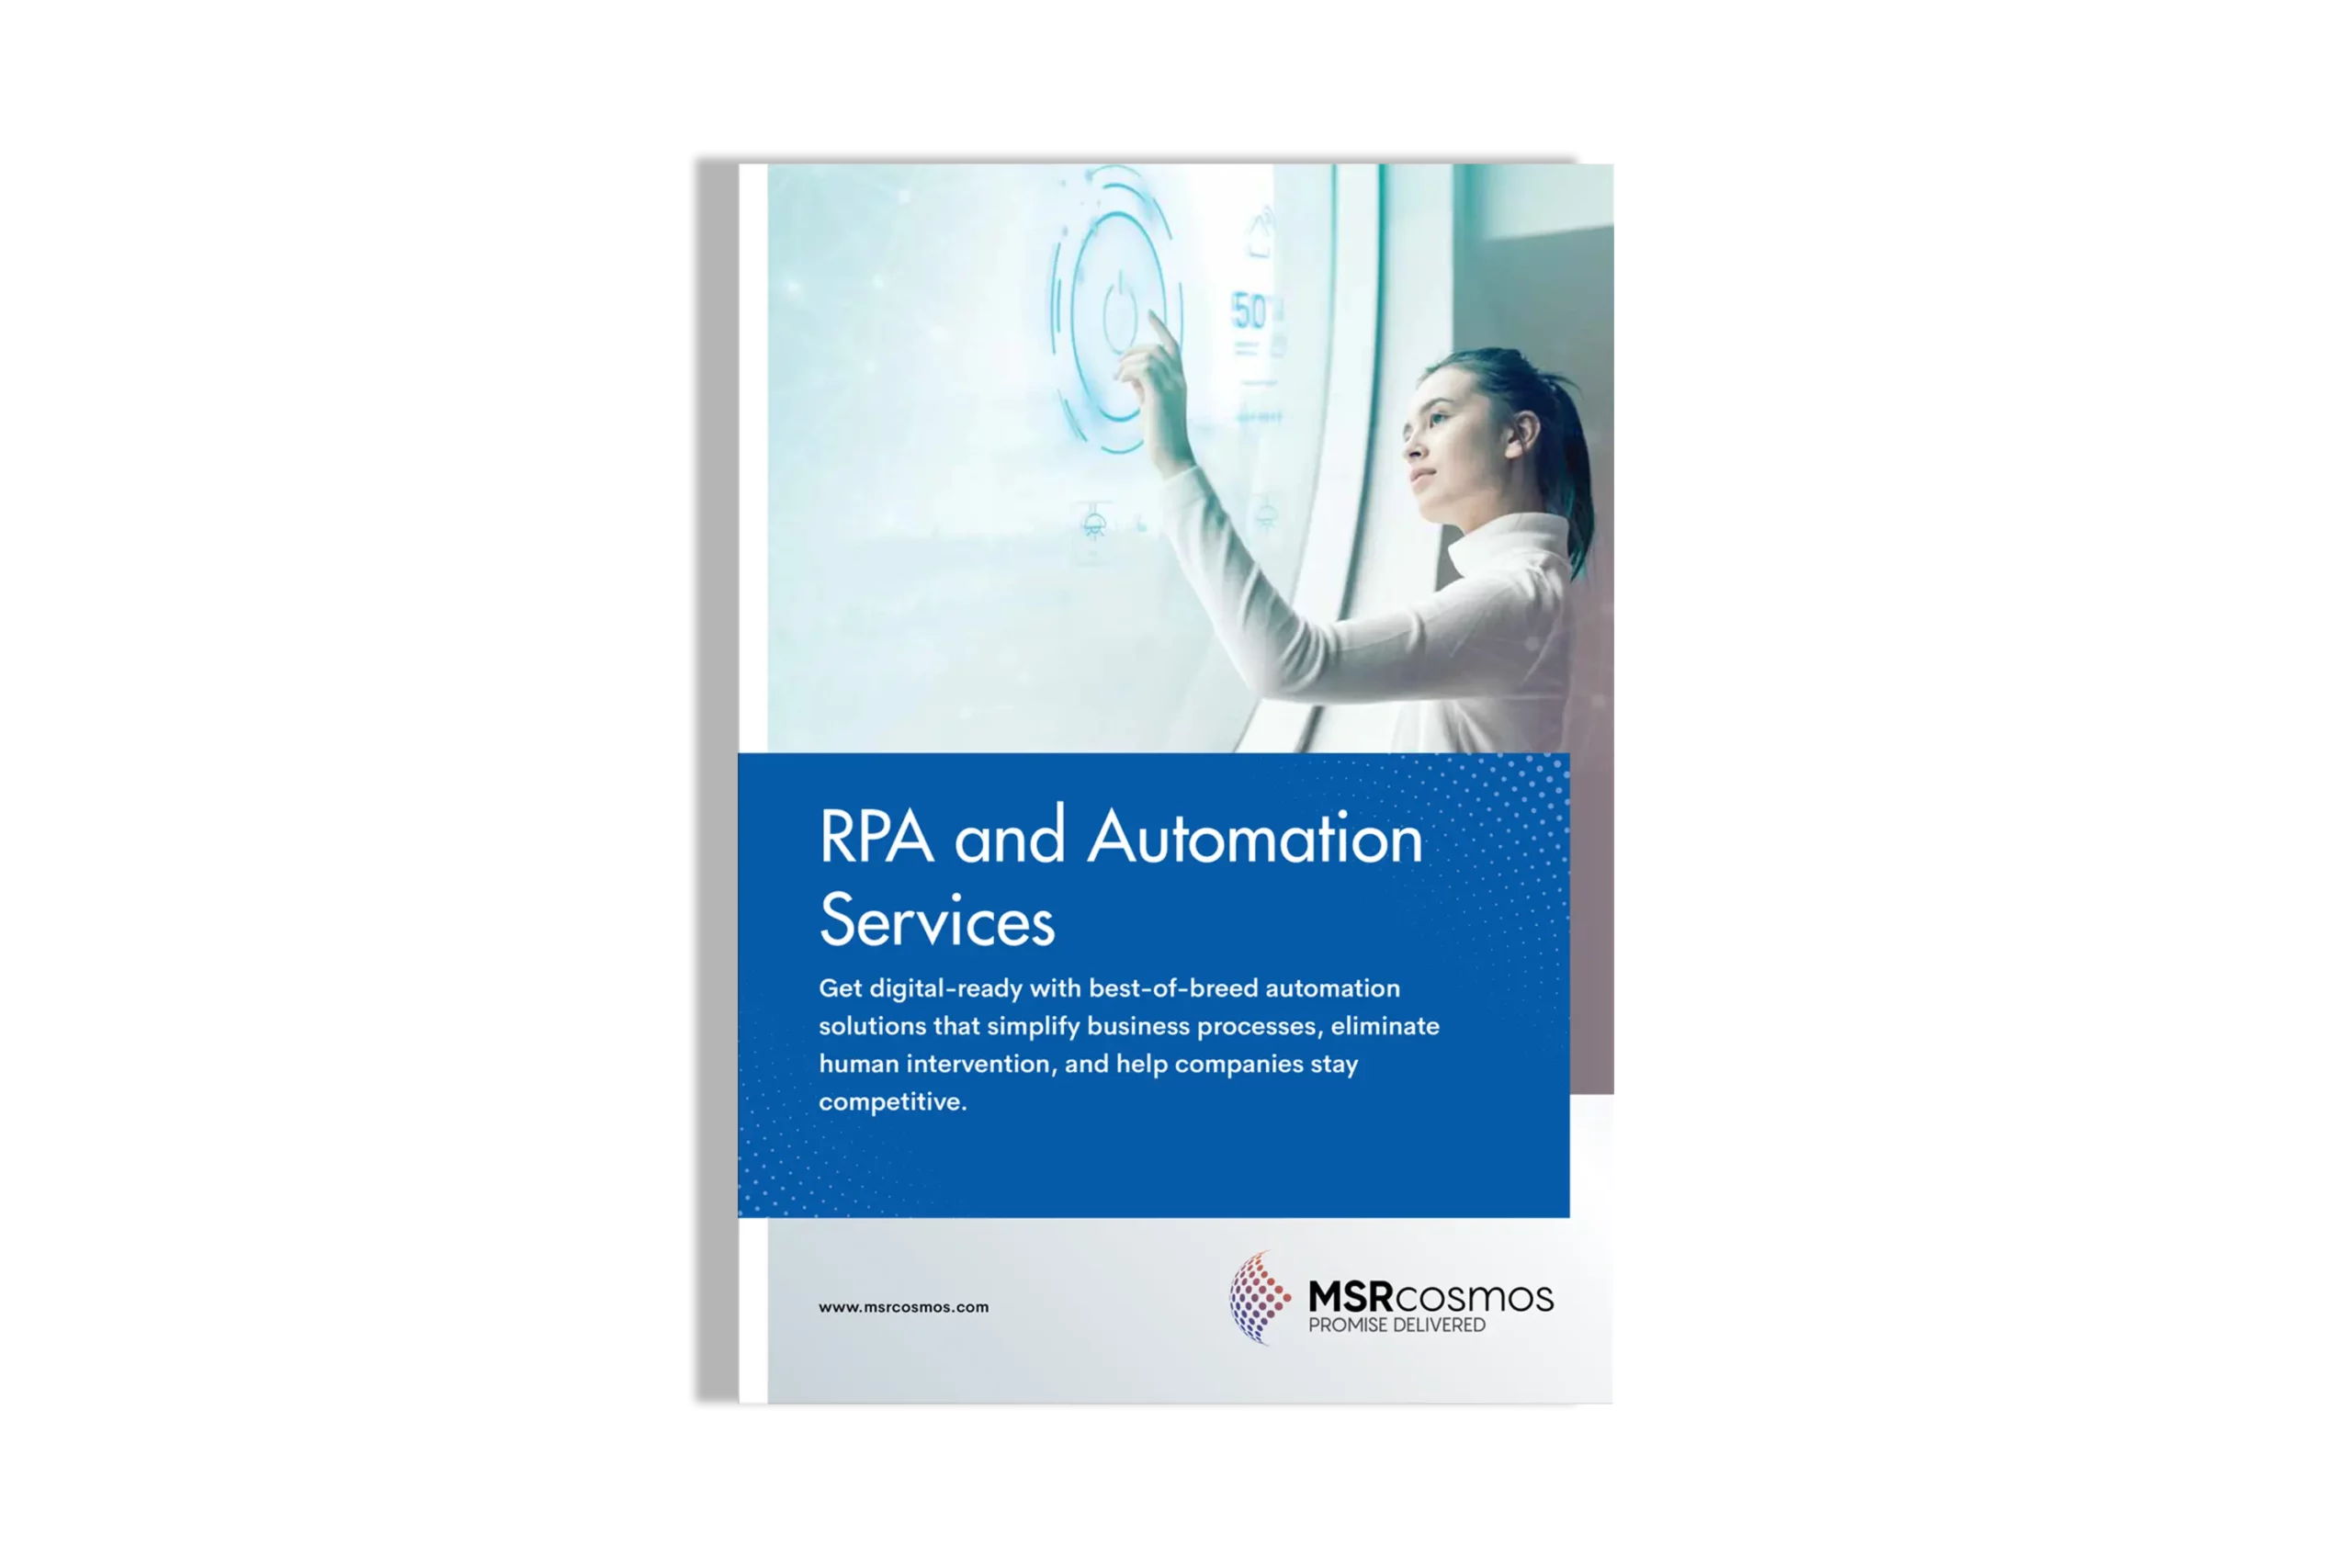 RPA and Automation Solutions Service Brochure | MSRcosmos